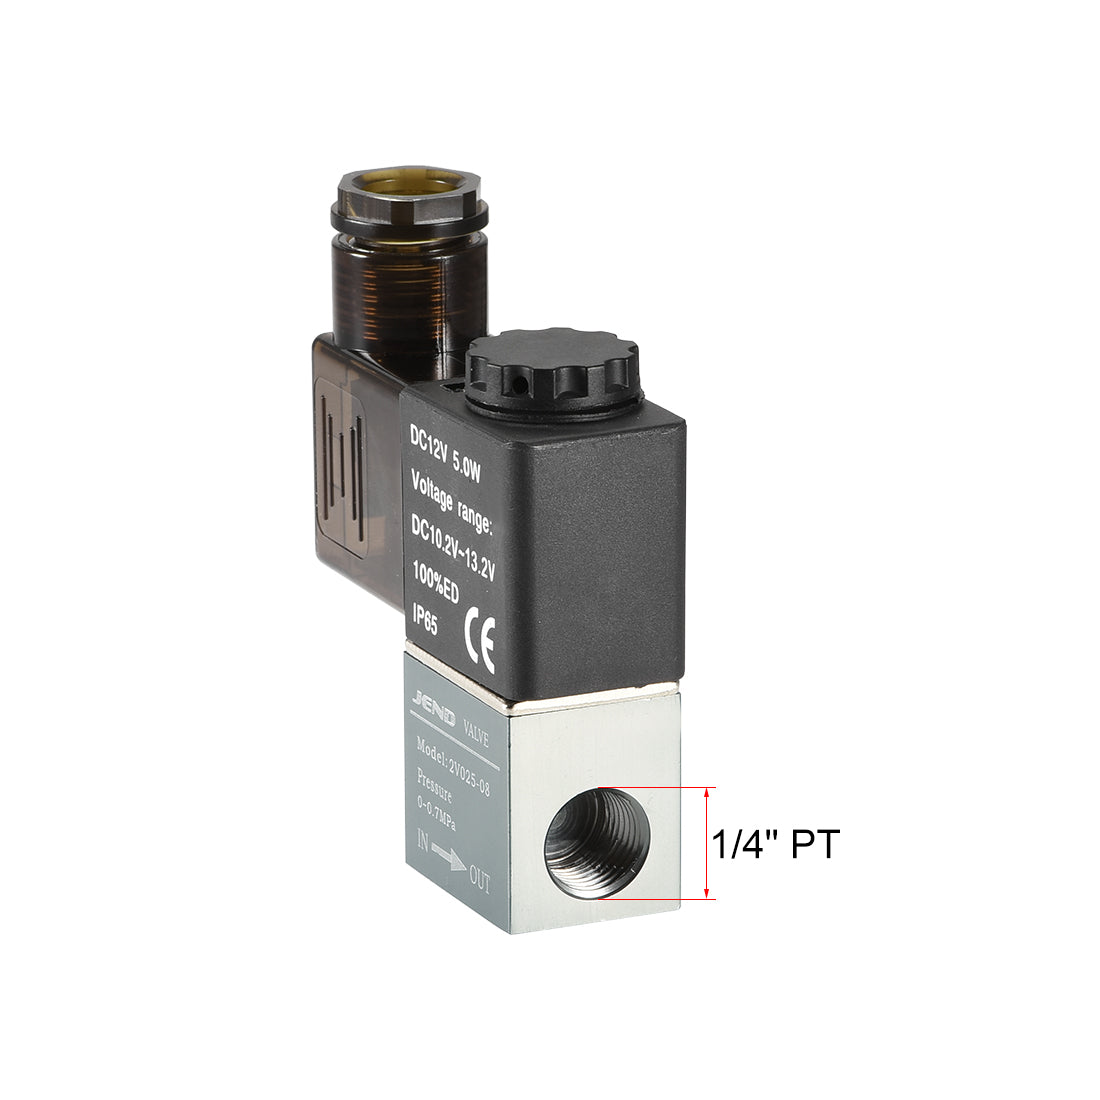 uxcell Uxcell 2V025-08 Pneumatic Air NC Single Electrical Control Solenoid Valve DC 12V 2 Way 2 Position 1/4" PT Thread Internally Piloted Acting Type